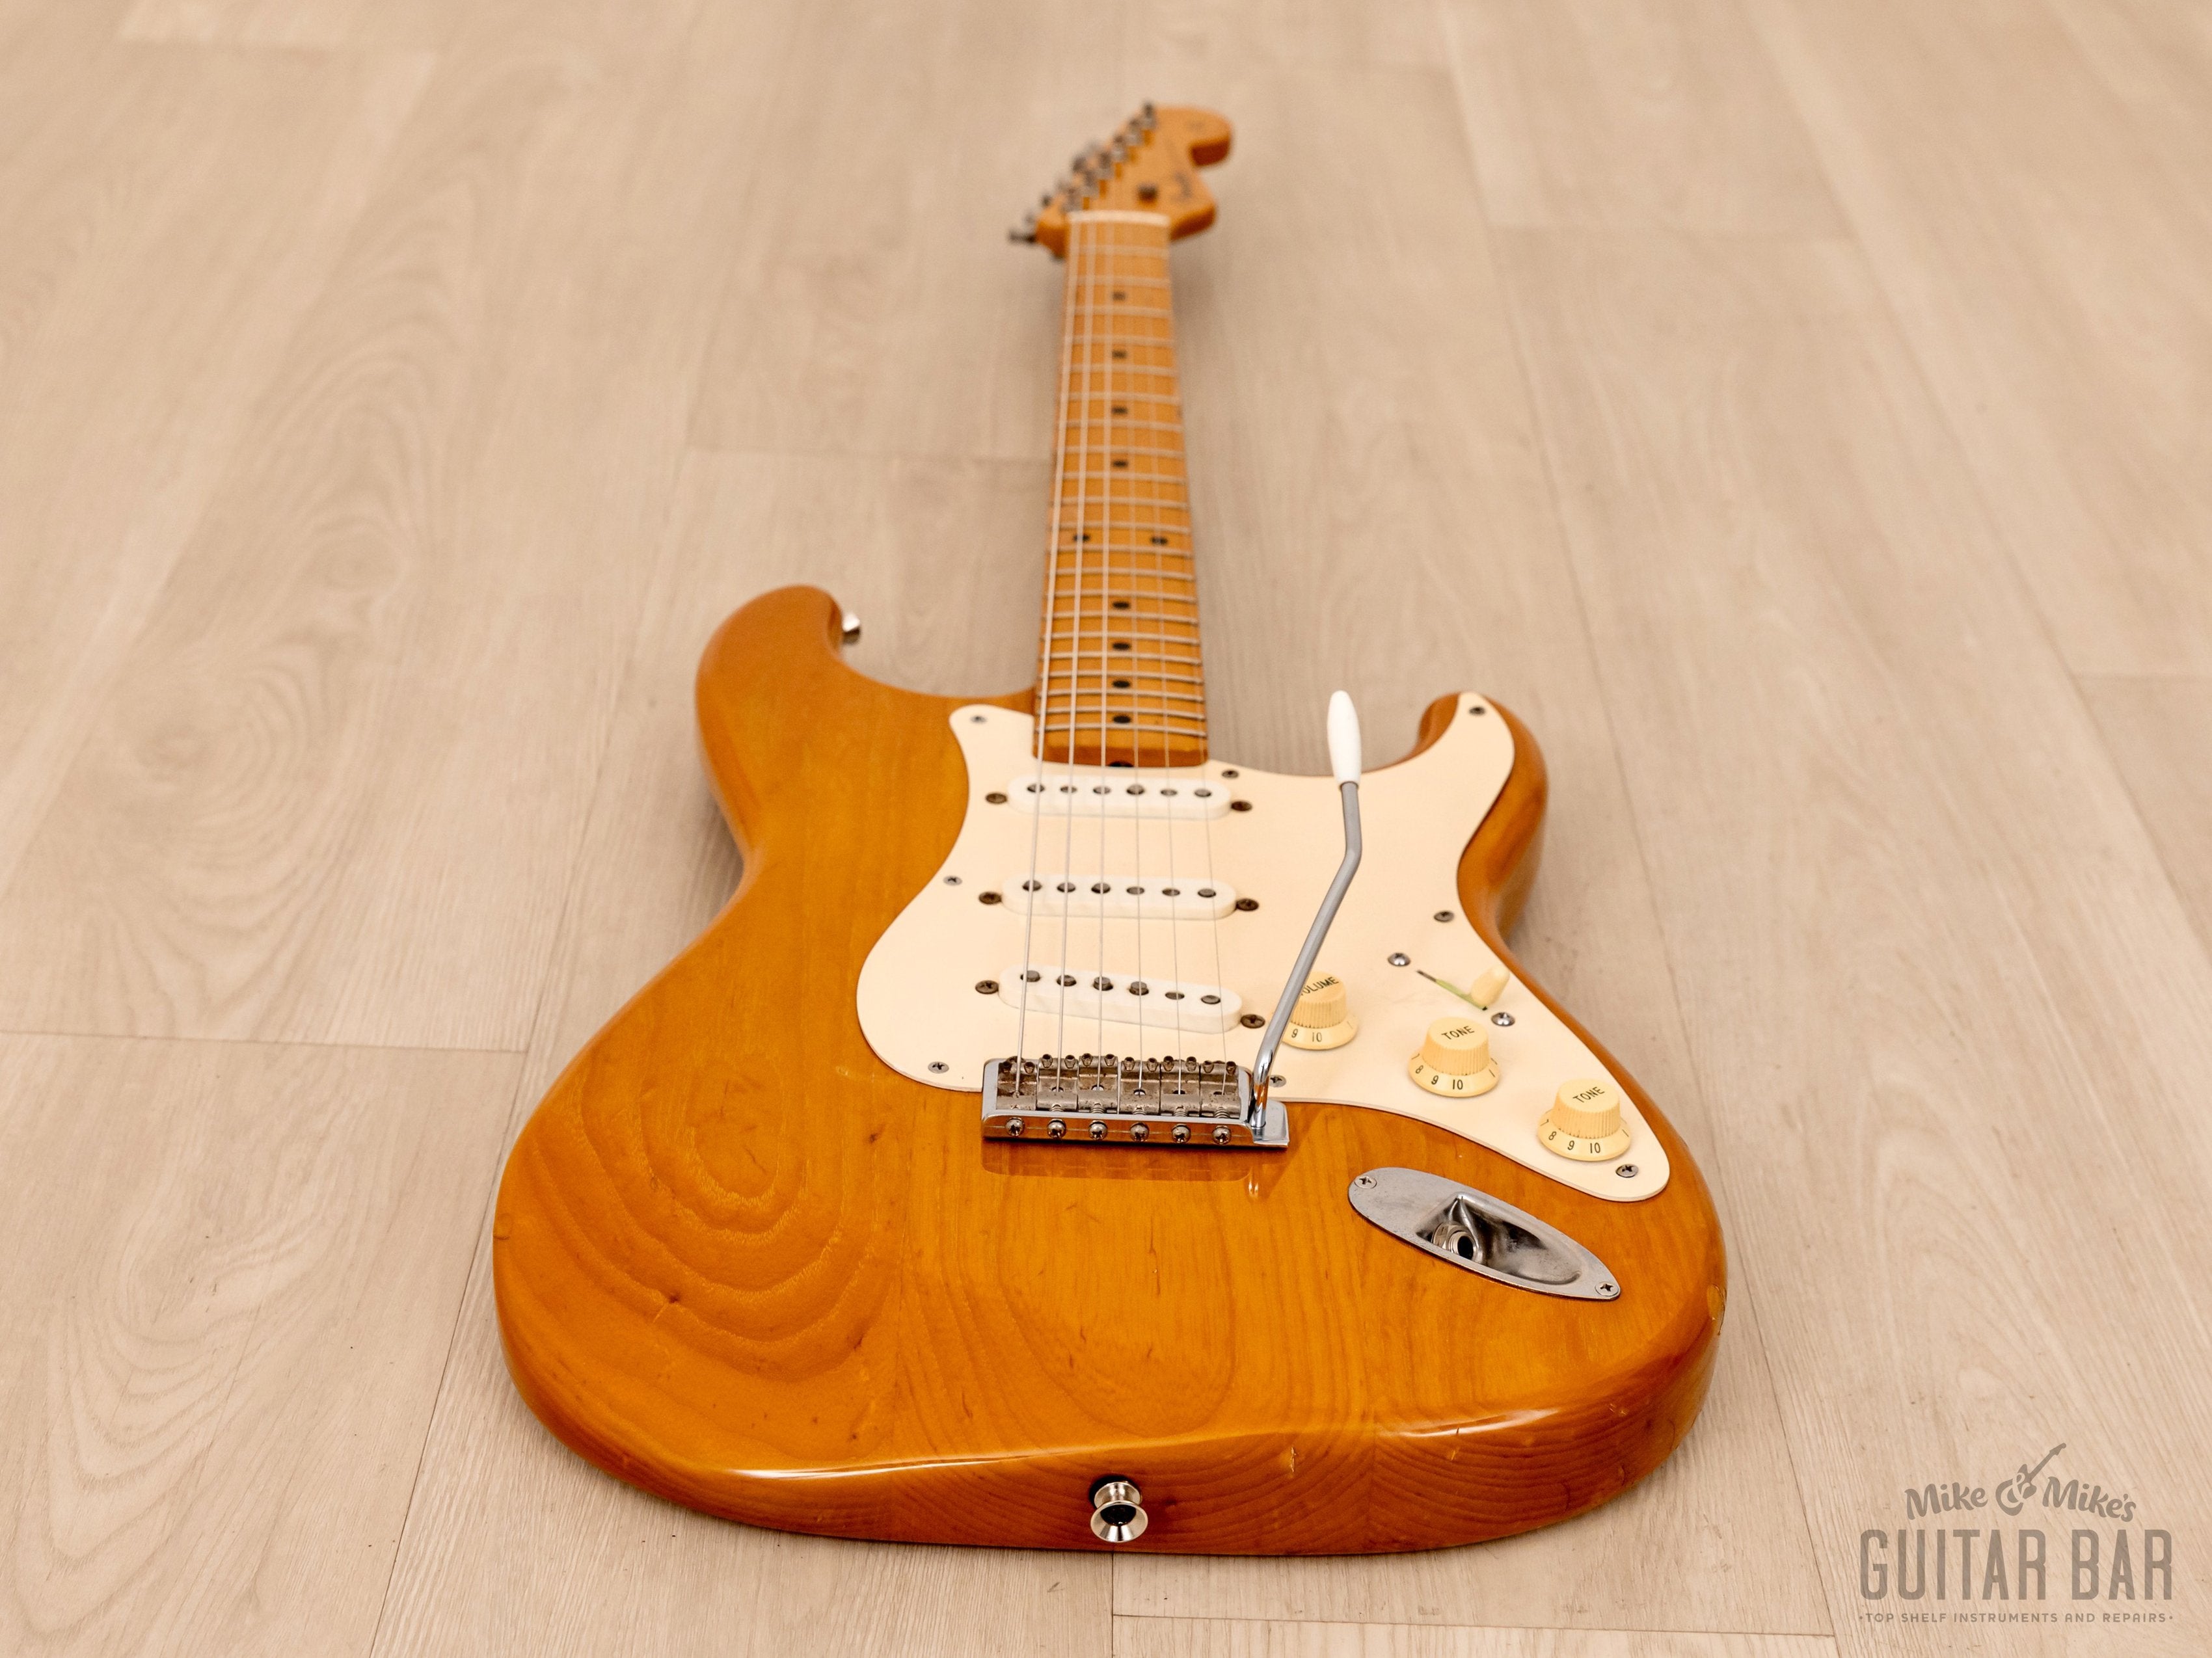 1993 Fender Custom Edition '54 Stratocaster ST54-75RV, USA Pickups, Lacquer Finish & Tweed Case, Japan MIJ